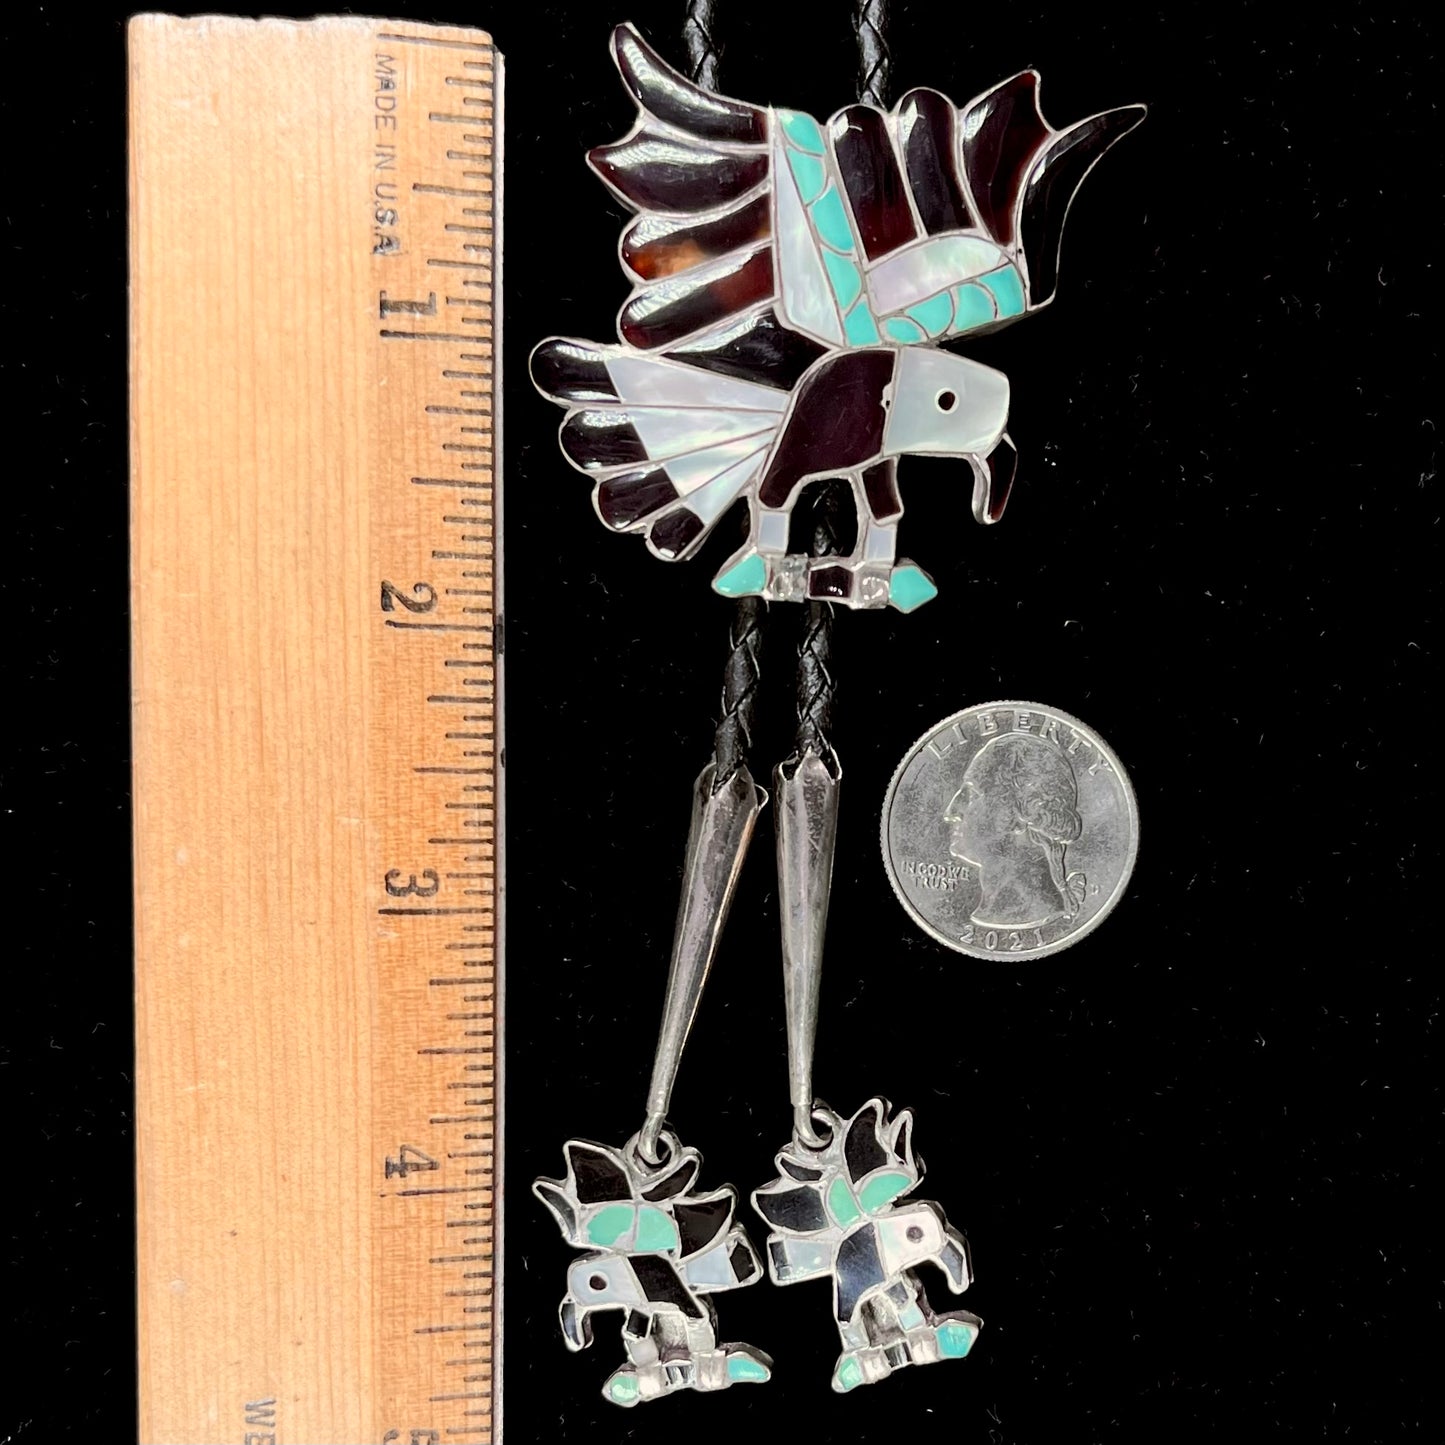 A sterling silver Zuni Indian-made bolo tie featuring the motif of three flying eagles inlaid with natural stones.